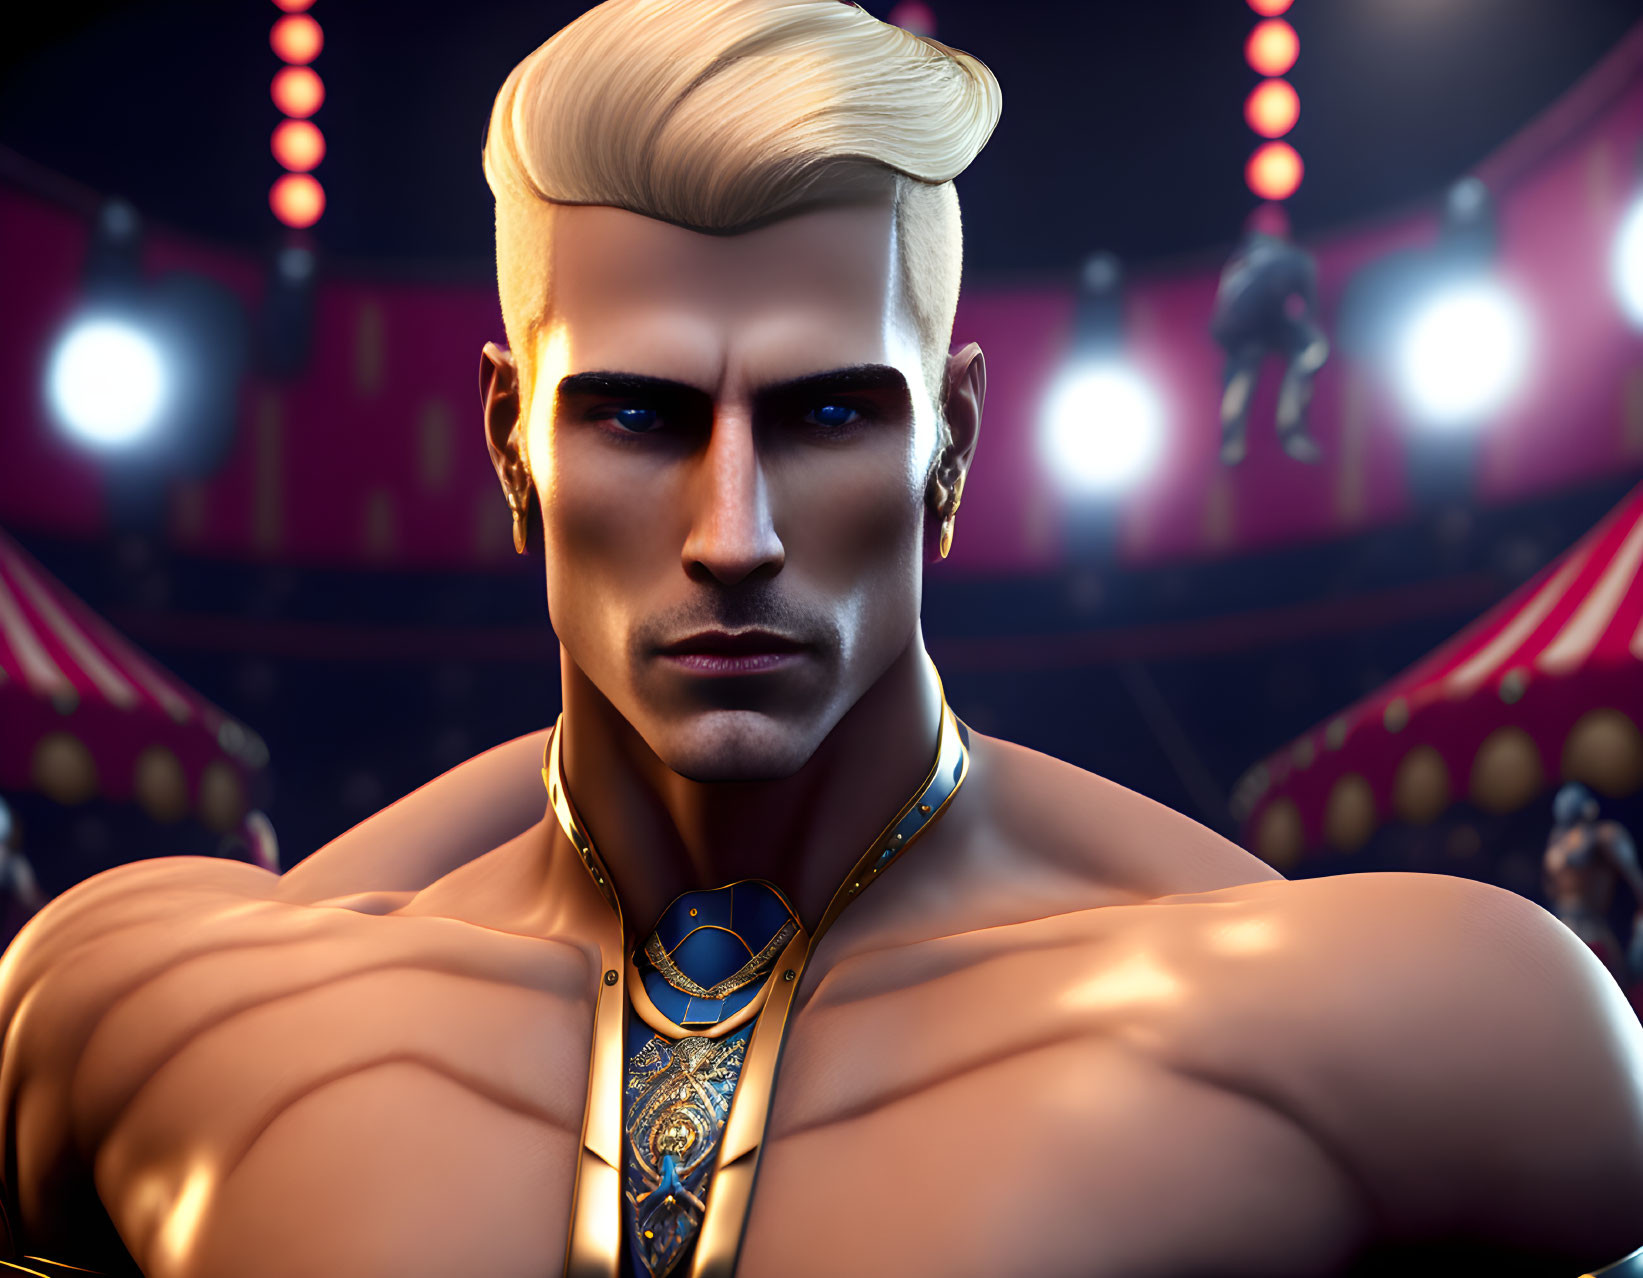 Muscular animated character with white pomp haircut in circus setting